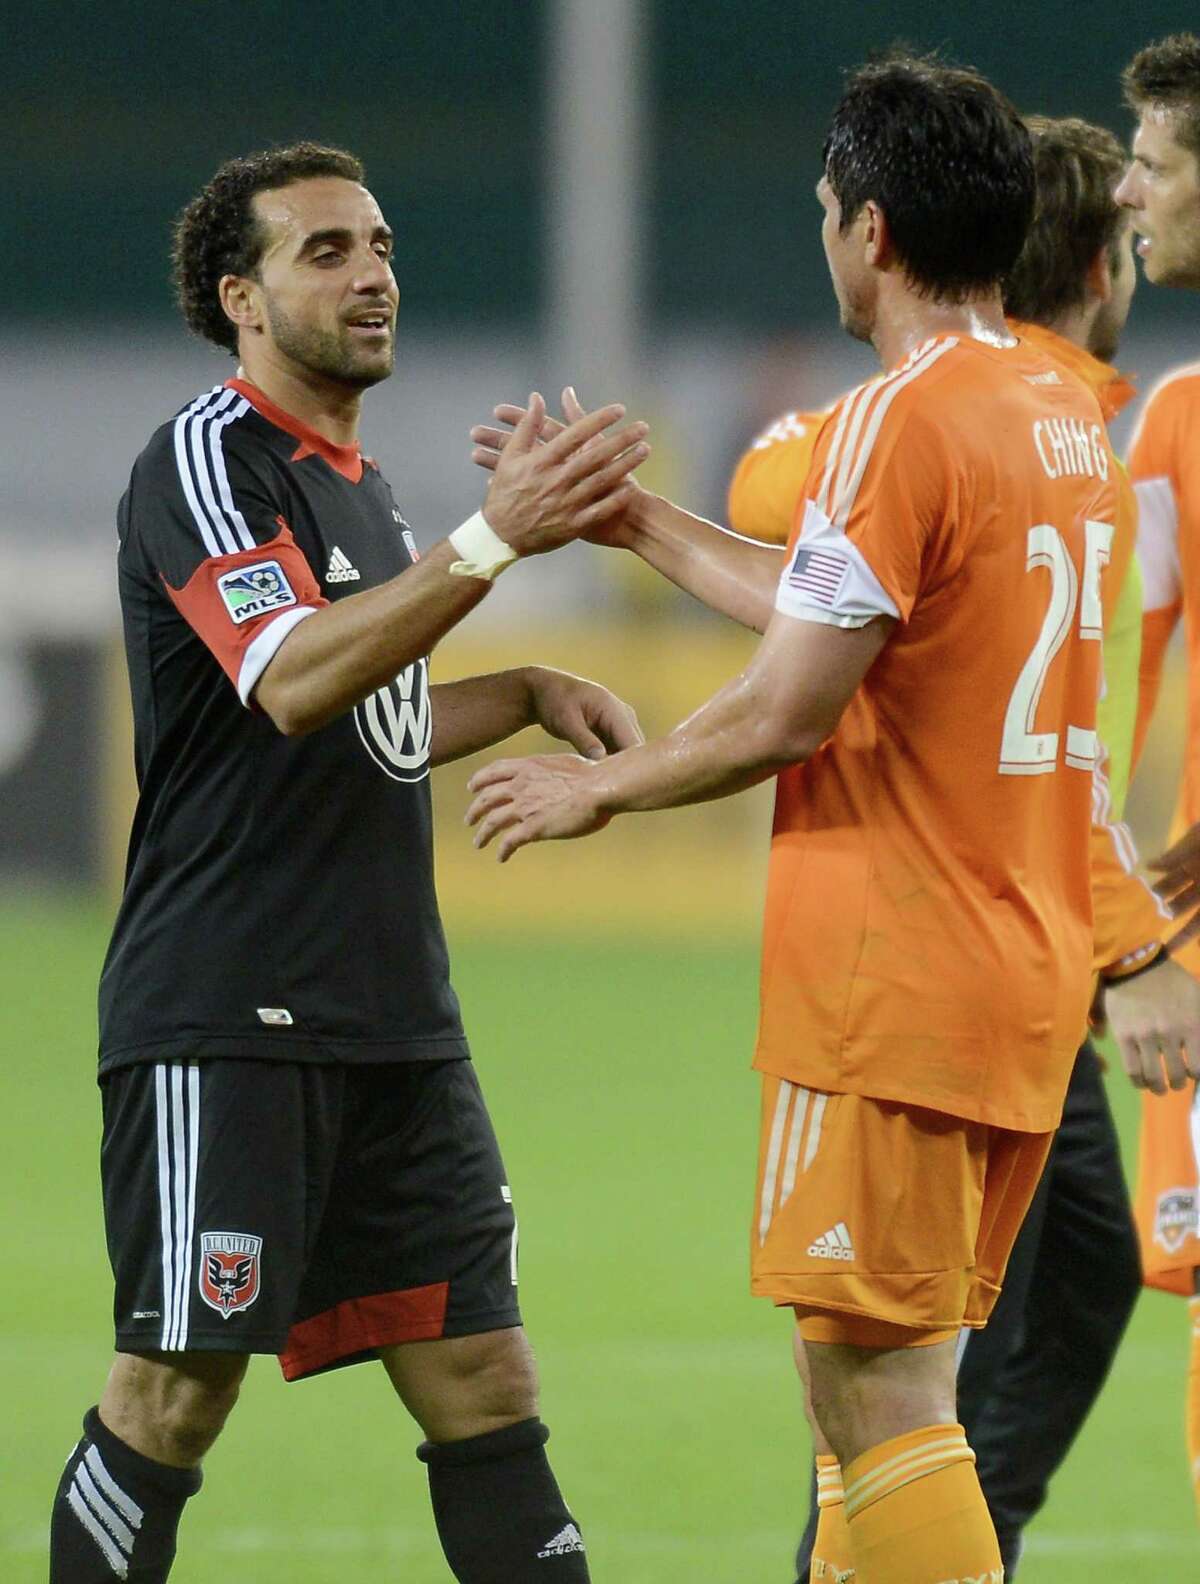 D.C. United midfielder Dwayne De Rosario (7) greets his former Houston Dynamo teammate Brian Ching (25) following the match at RFK Stadium in Washington, D.C., Wednesday, May 8, 2013. Dynamo blanked United, 4-0. (Chuck Myers/MCT)